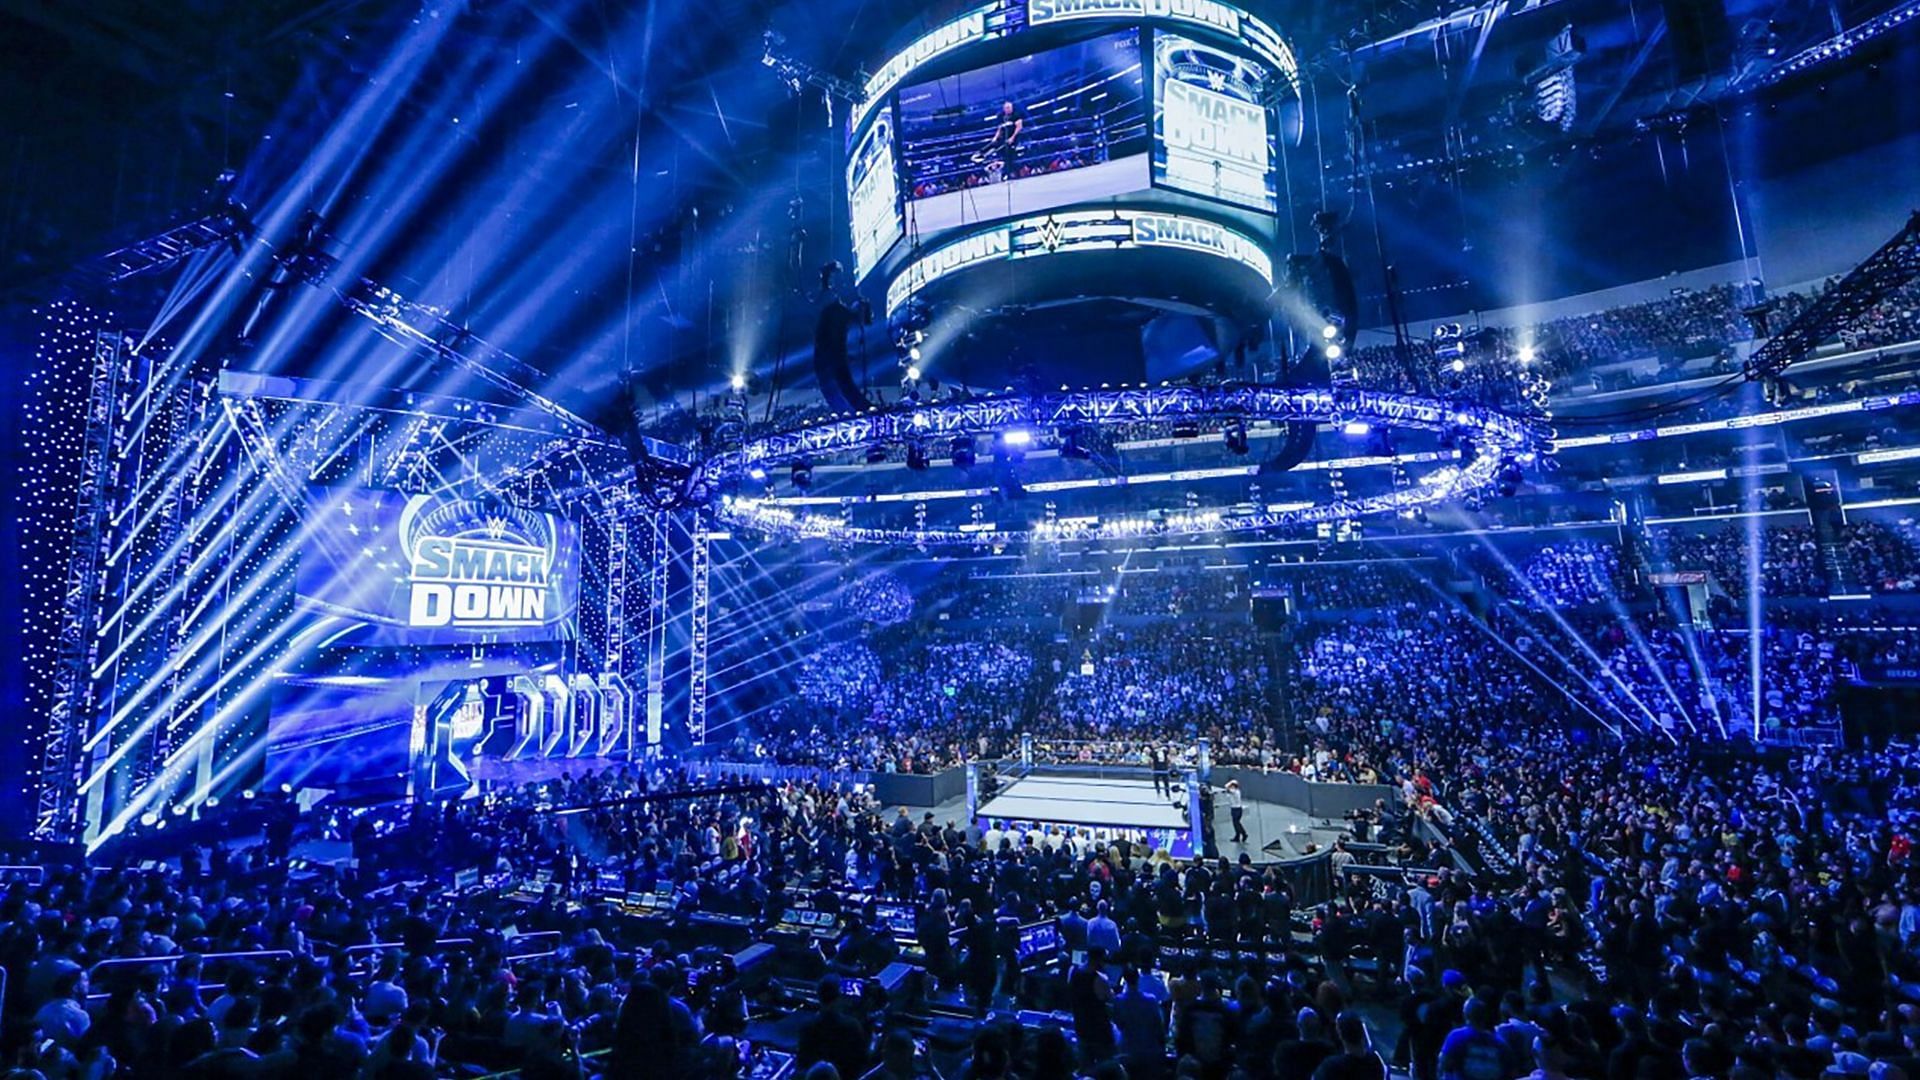 The WWE SmackDown logos and set on display inside arena